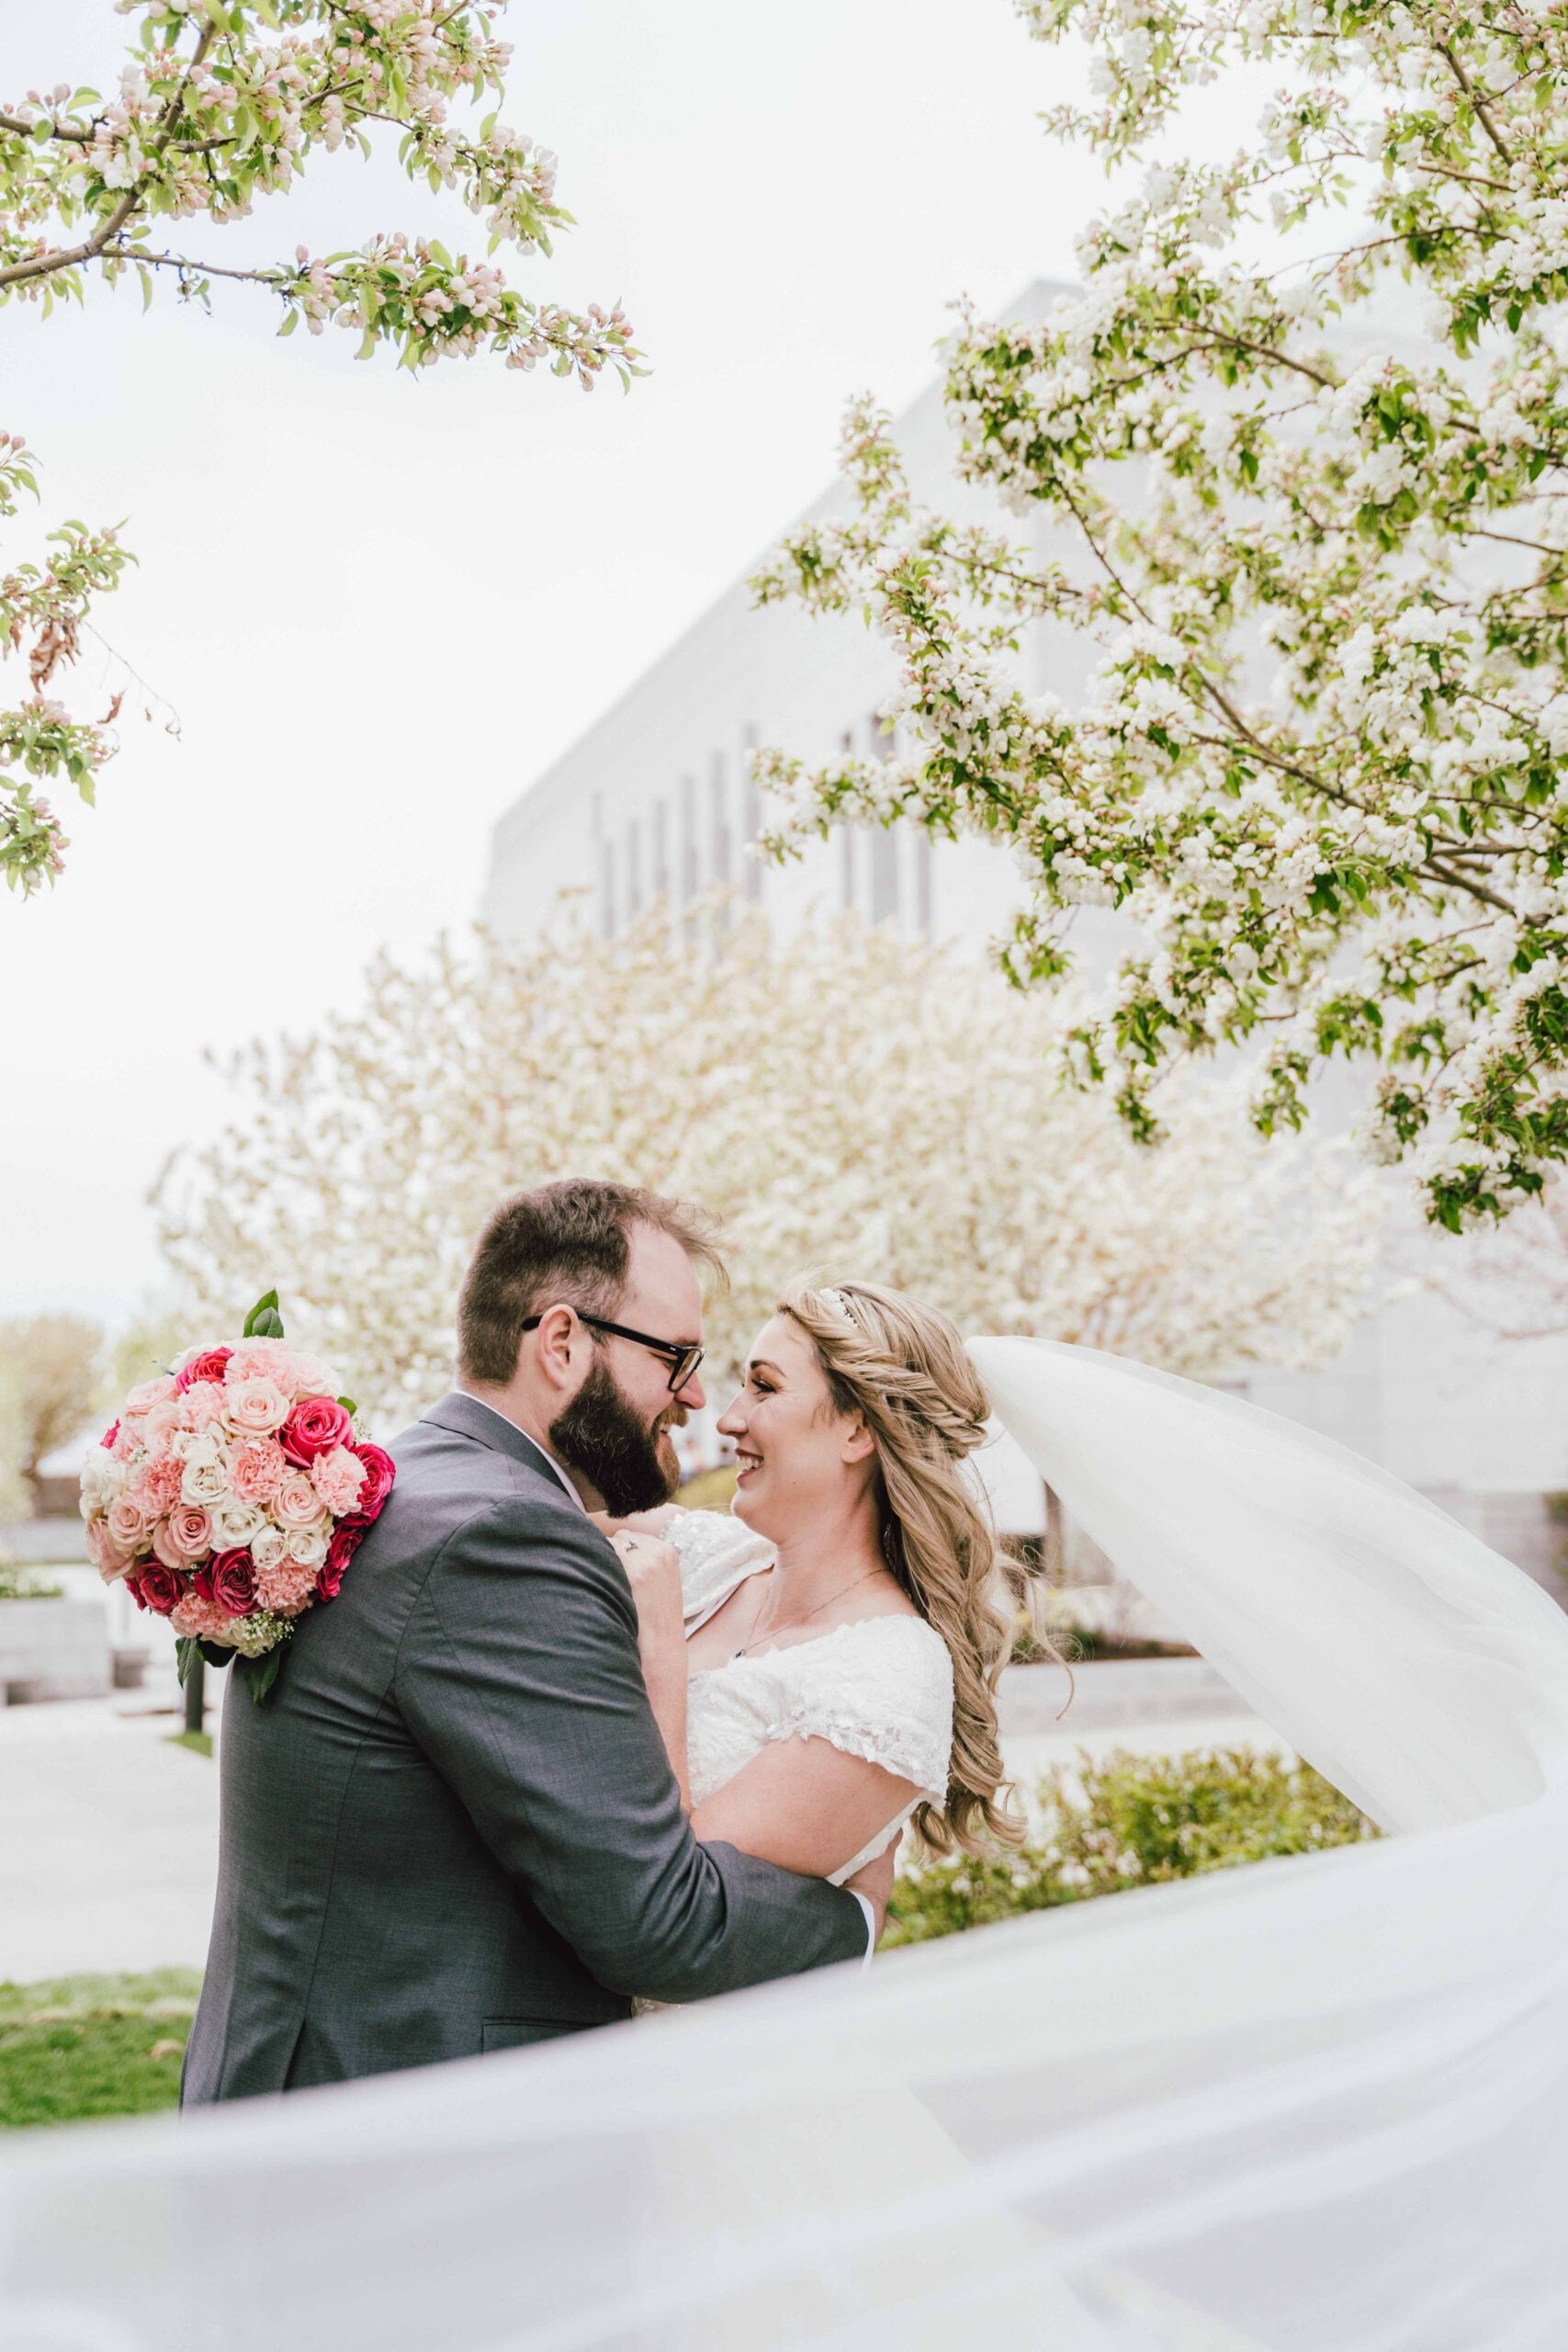 love brittny lds temple wedding couples